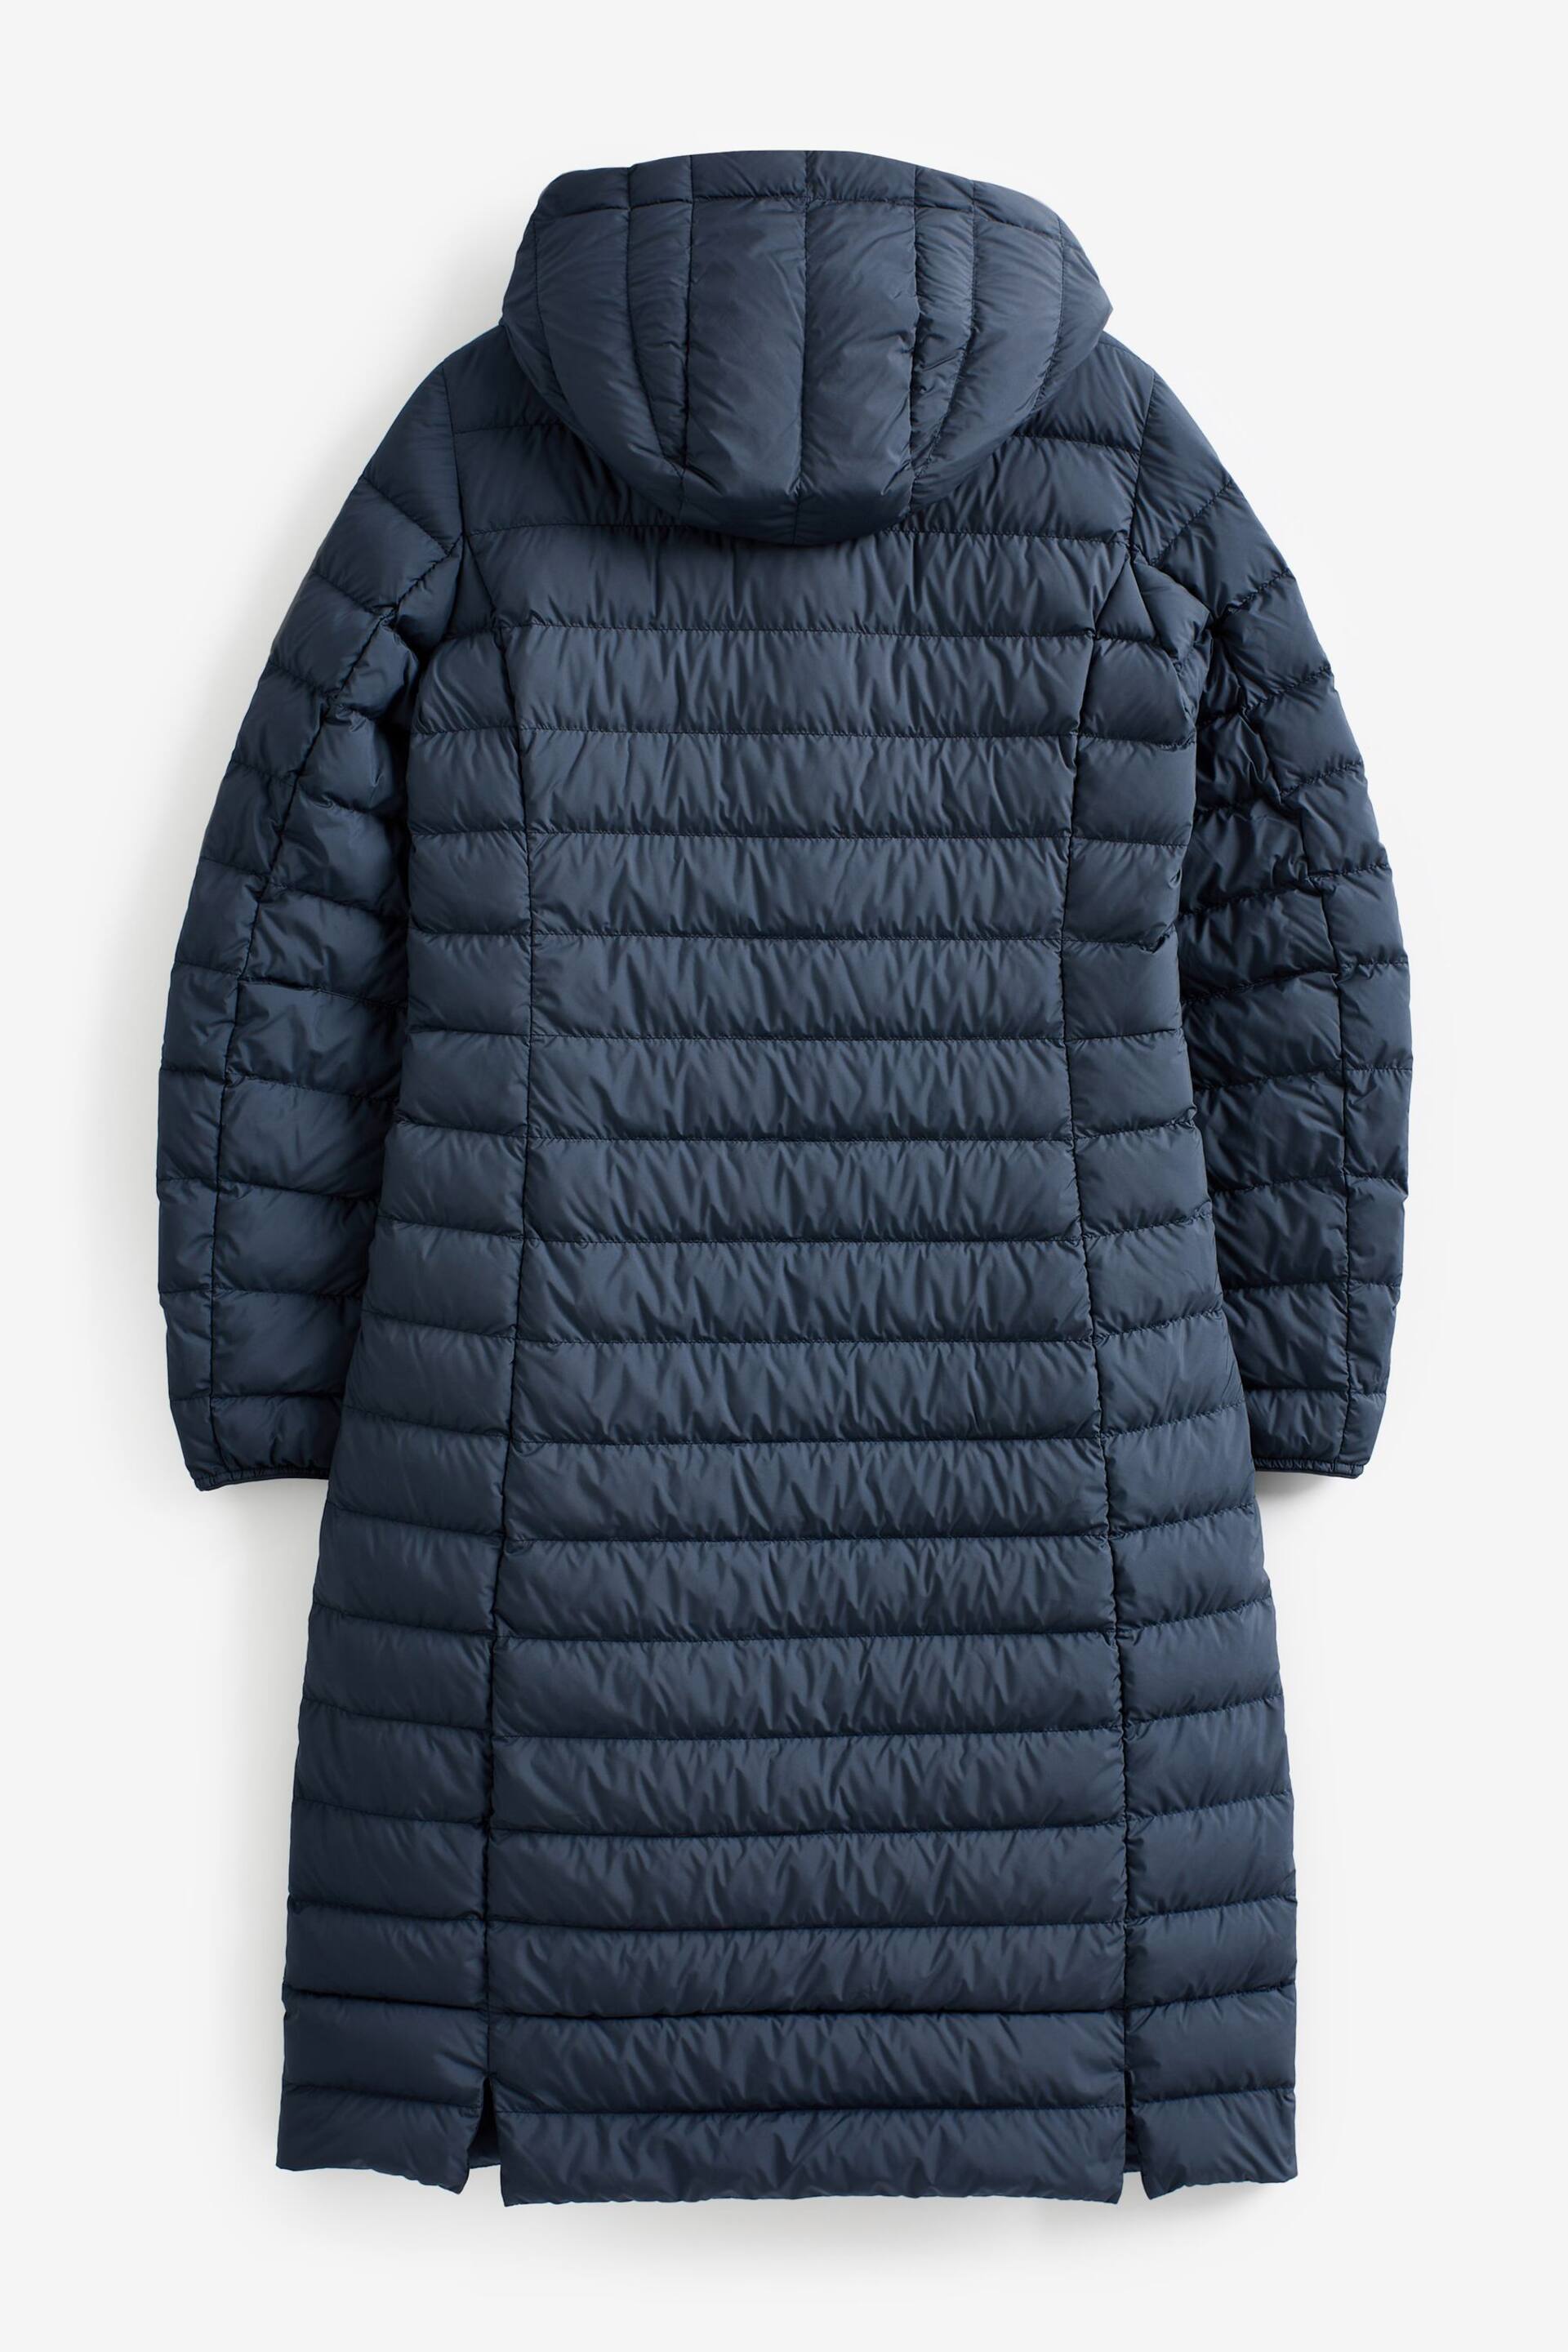 Parajumpers Navy Omega Super Light Weight Long Puffer Coat - Image 2 of 3